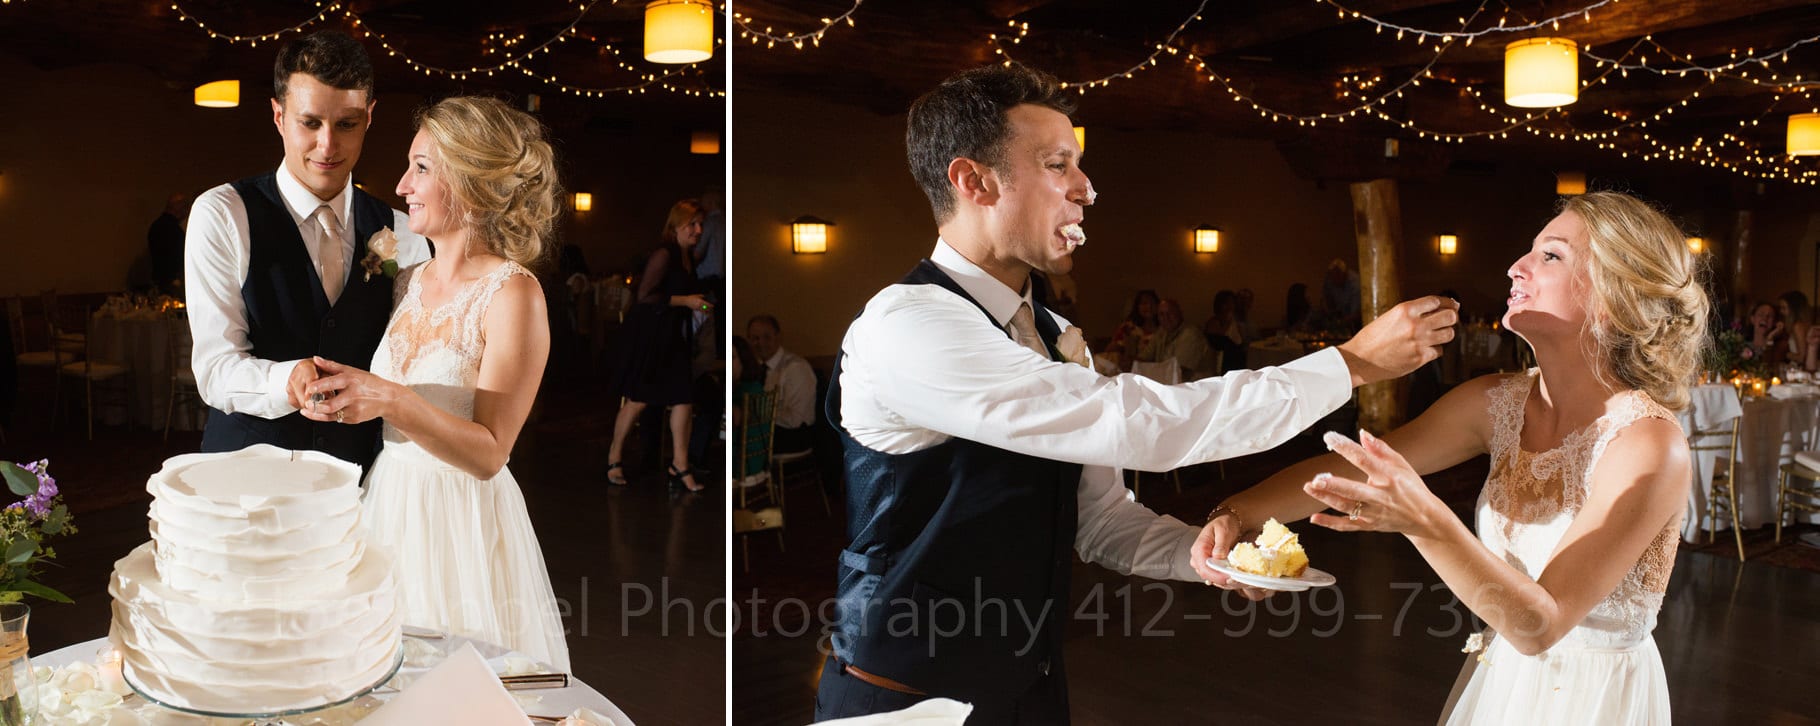 A bride and groom cut their wedding cake and then smear icing on each other's faces during their Seven Springs Wedding.